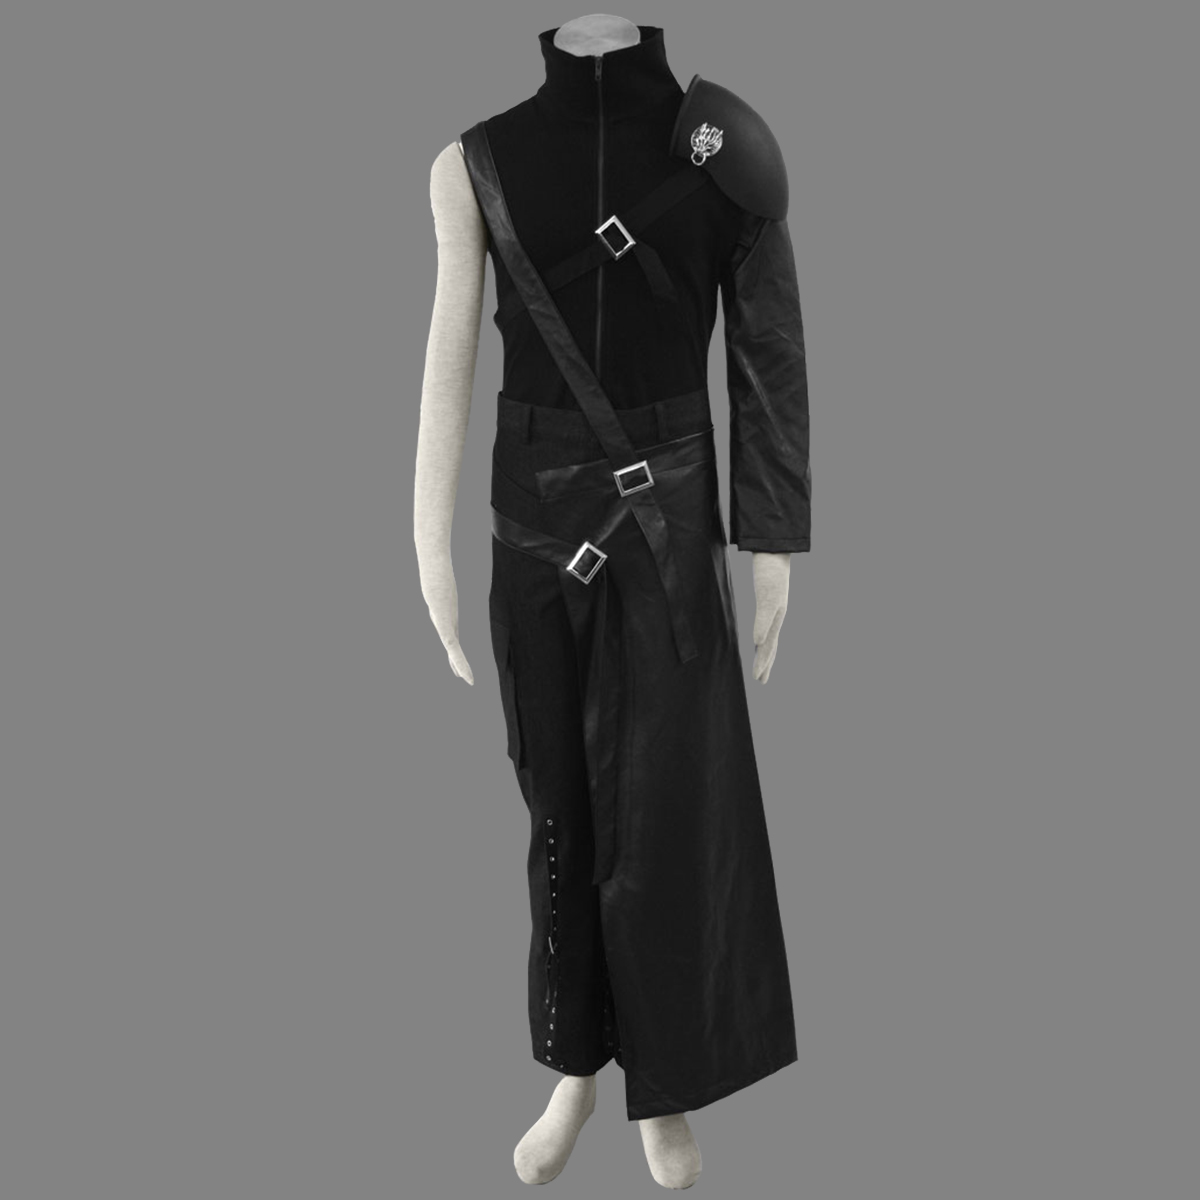 Final Fantasy VII Cloud Strife Anime Cosplay Costumes Outfit